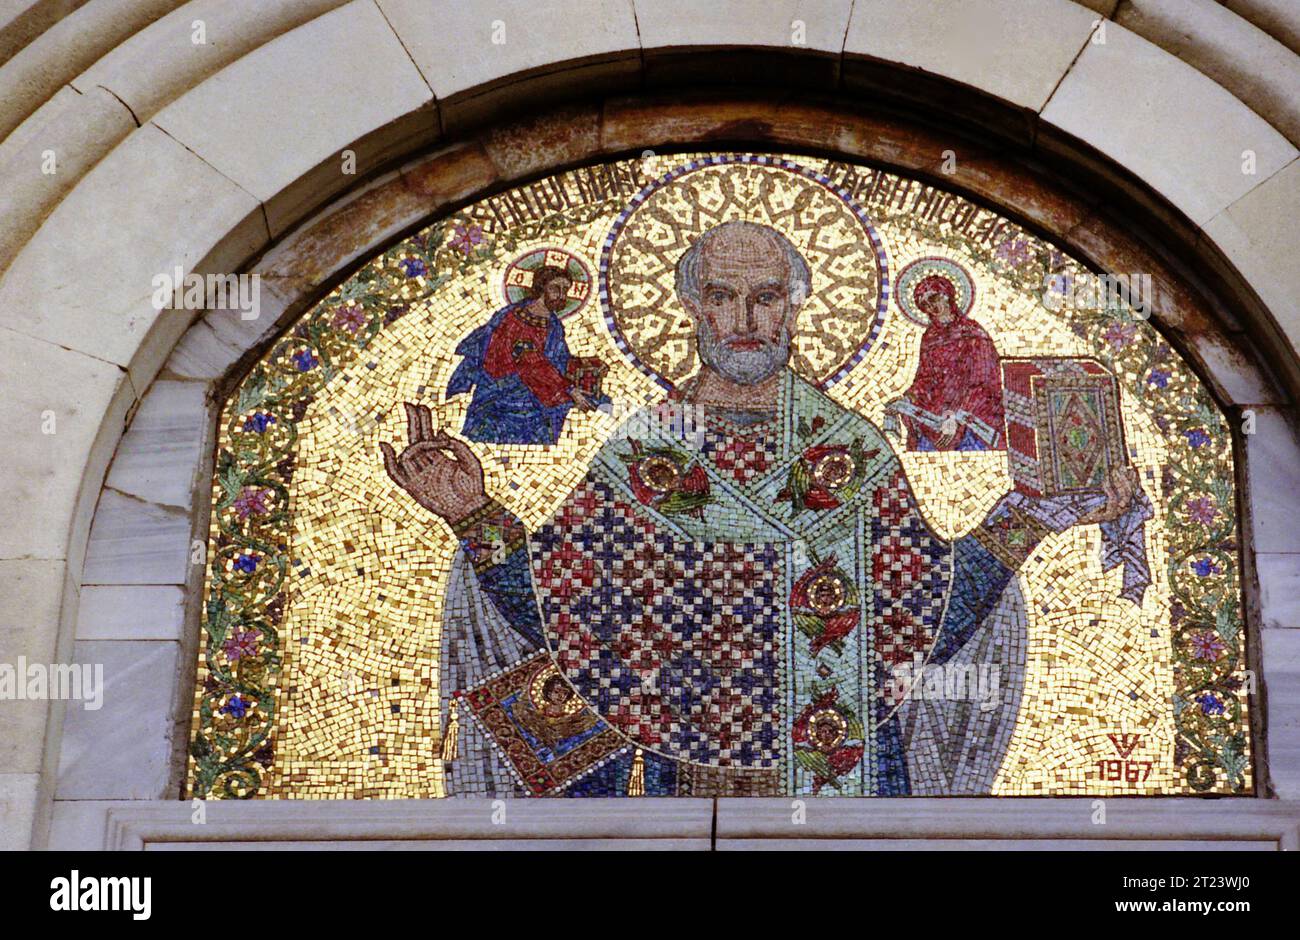 Dâmbovița County, Romania, 1991. Exterior view of St. Nicholas Church at Dealu Monastery, a historical monument from the 15th-century. Mosaic of St. Nicholas at the entrance in the church. Stock Photo